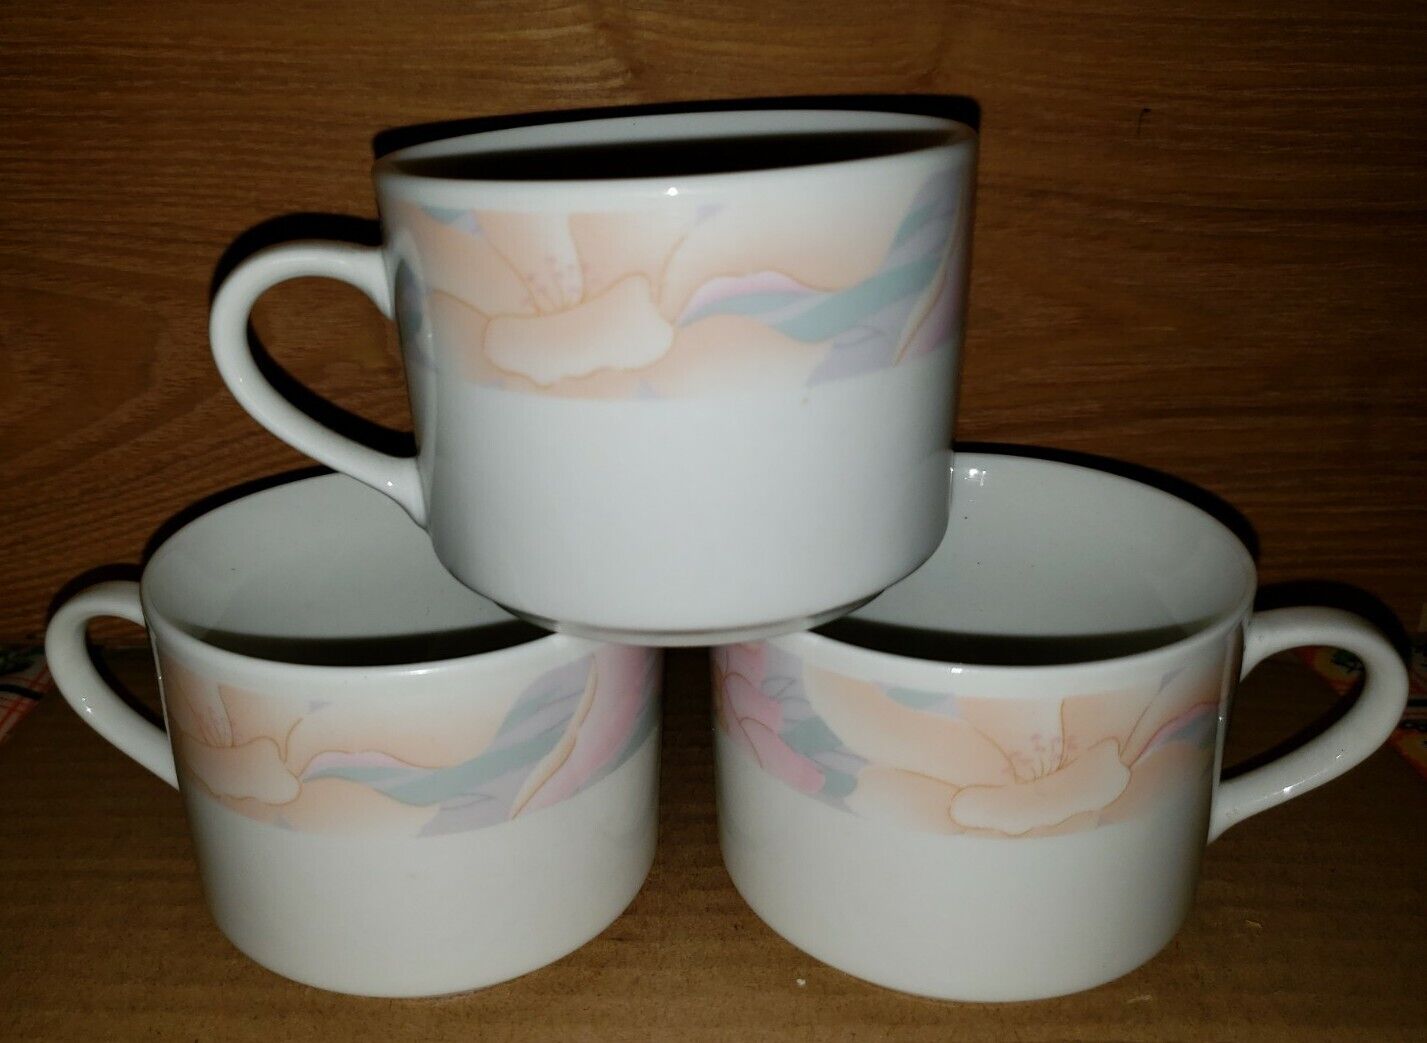 SARA by China Pearl 3 Cups 9030 Discontinued Pattern Floral 1990 